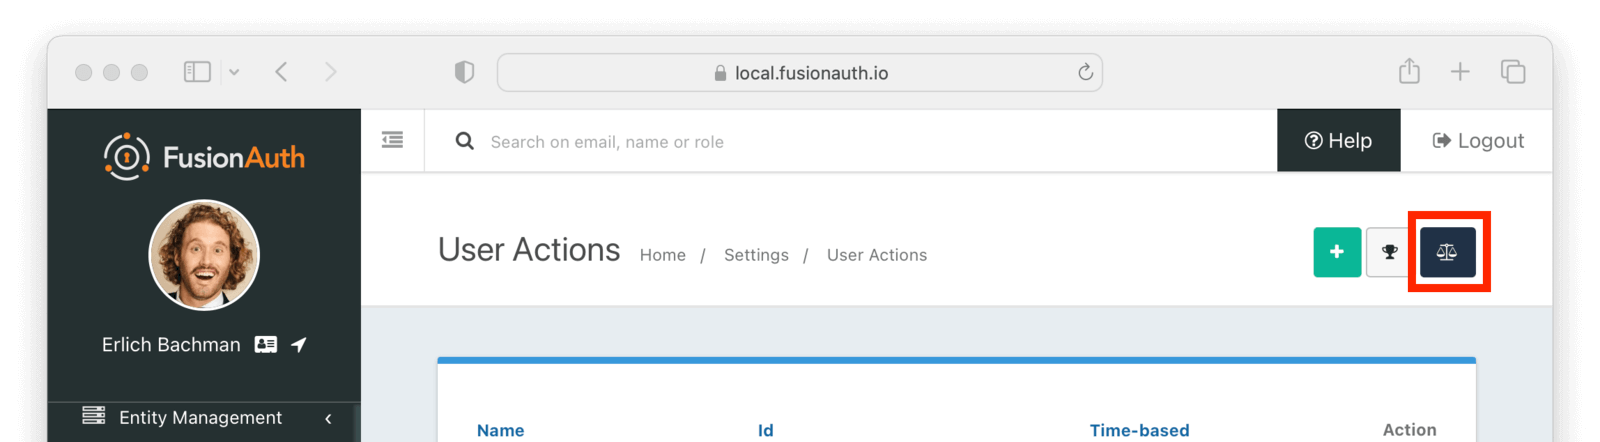 Navigate to User Action Reasons in FusionAuth